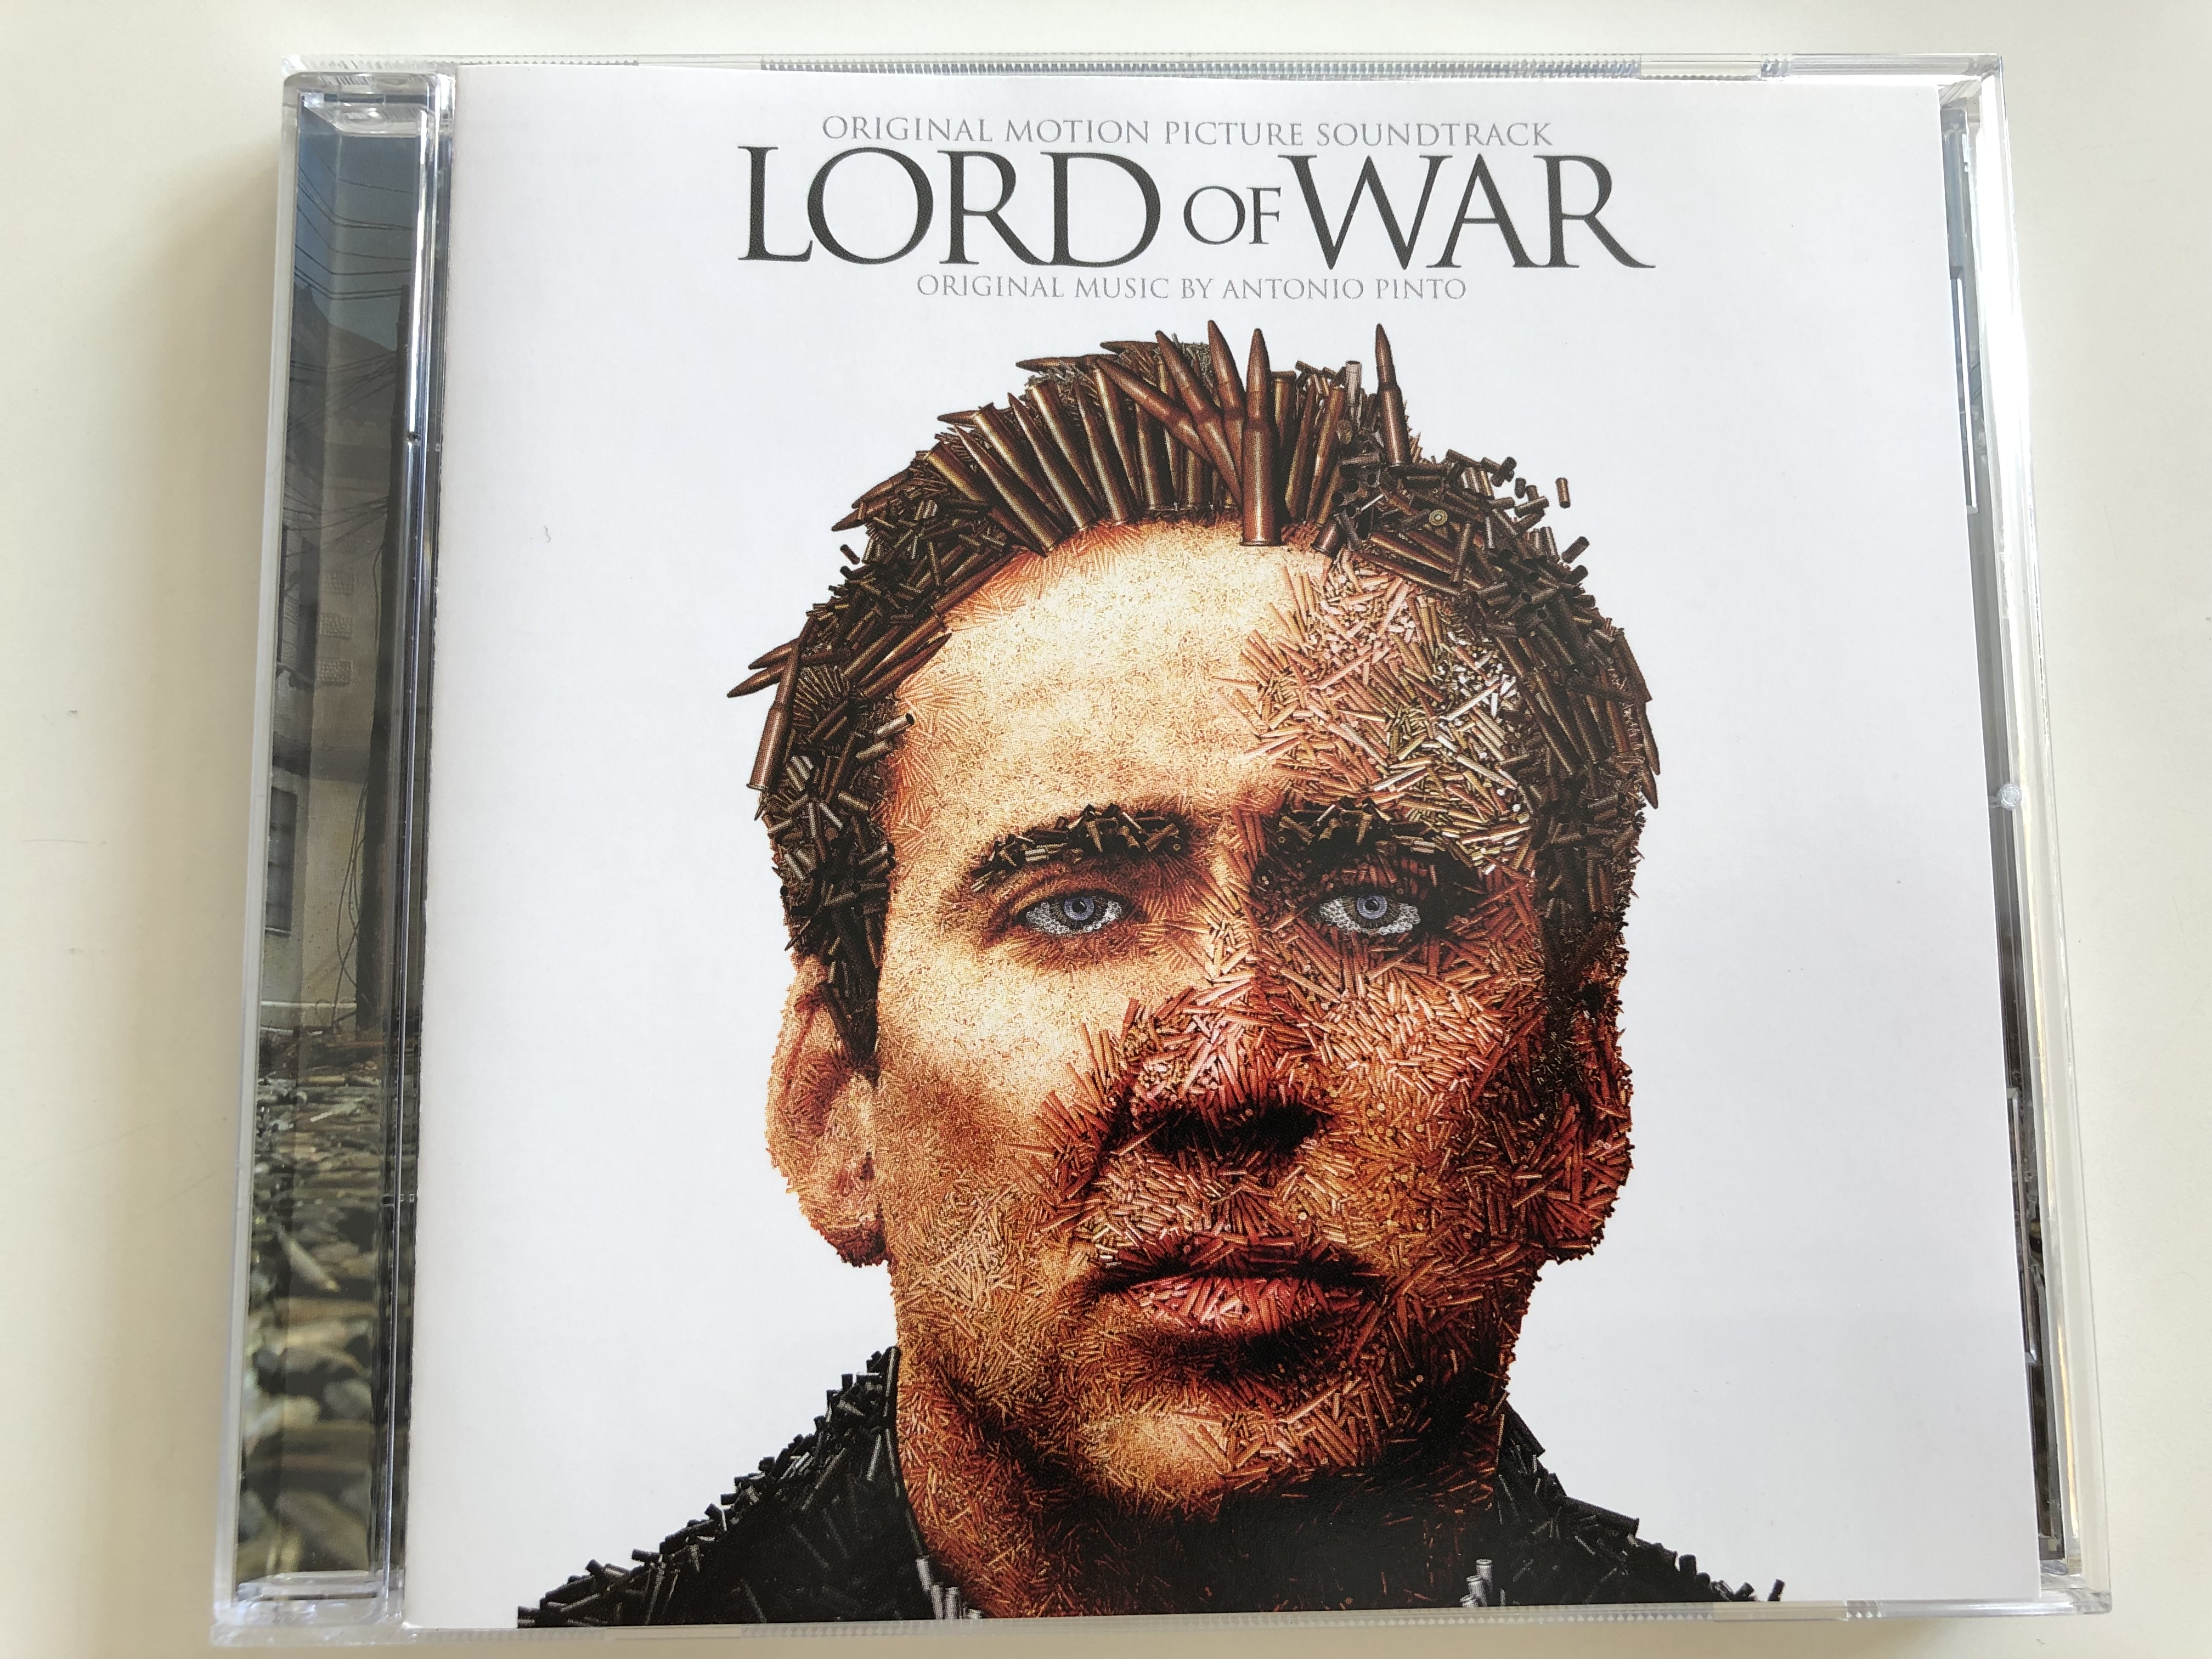 lord-of-war-original-motion-picture-soundtrack-original-music-by-antonio-pinto-audio-cd-2005-0167962ere-1-.jpg